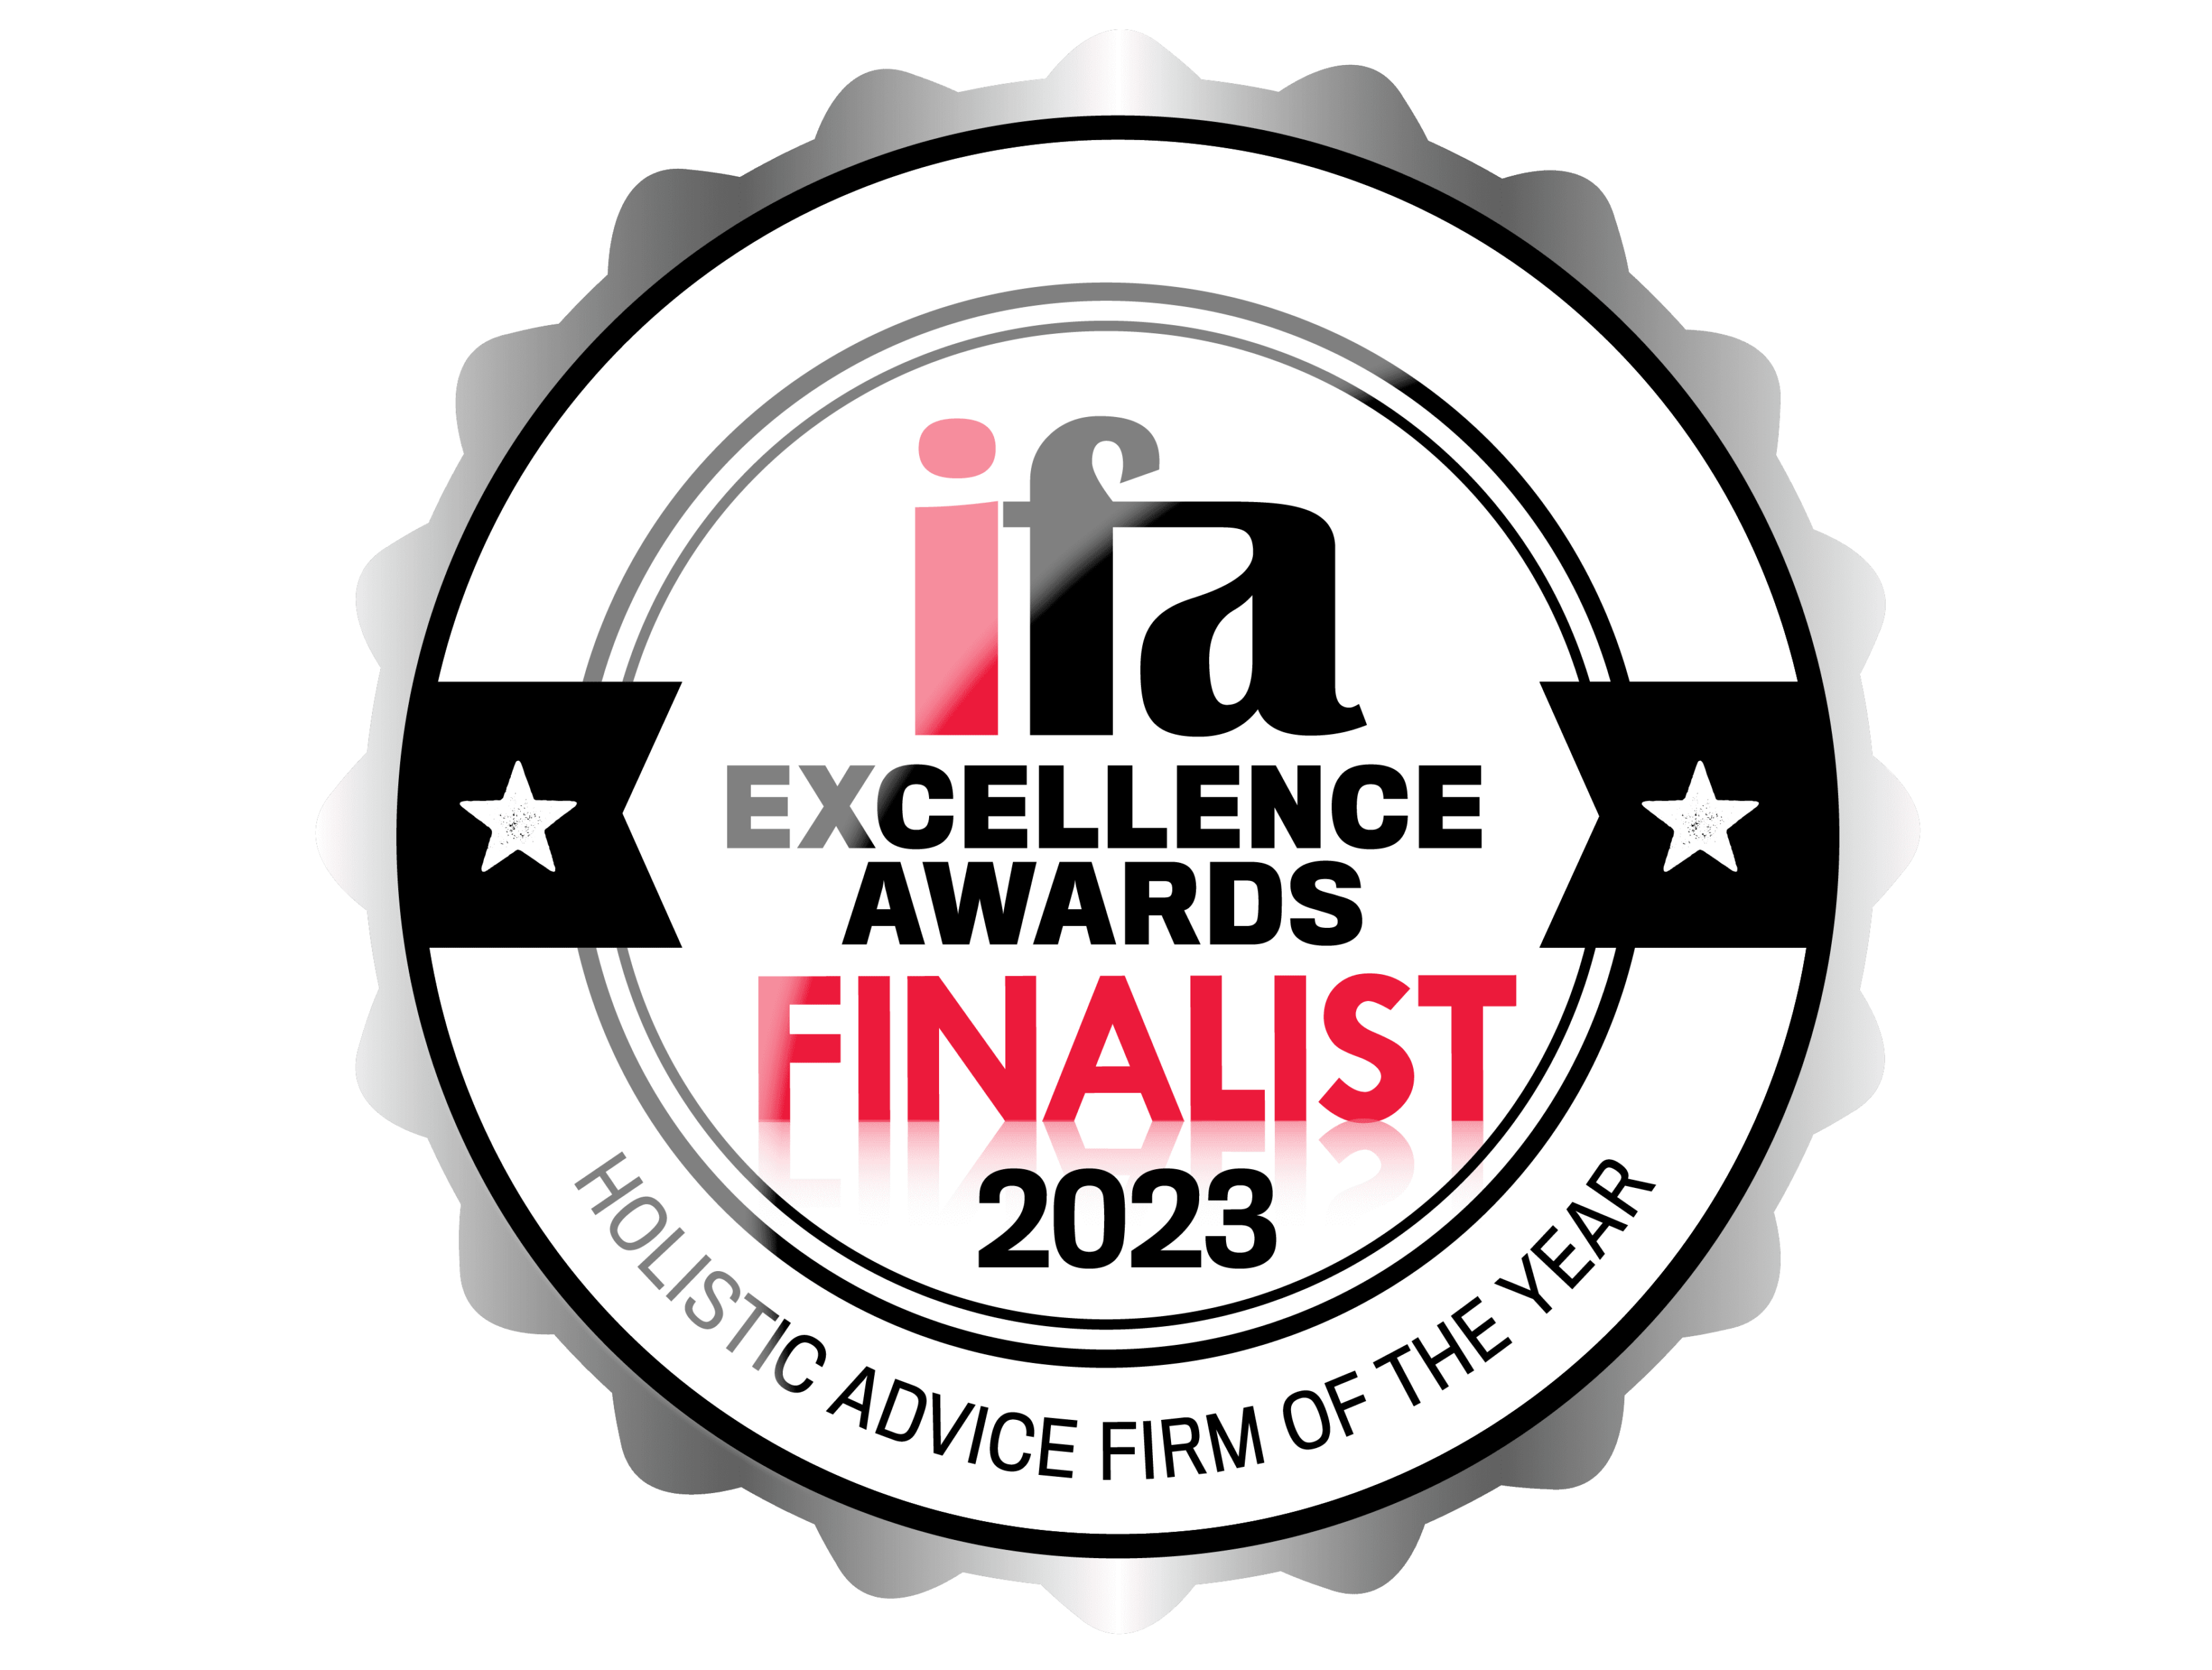 IFA national finalist for holistic advice firm of the year 2023